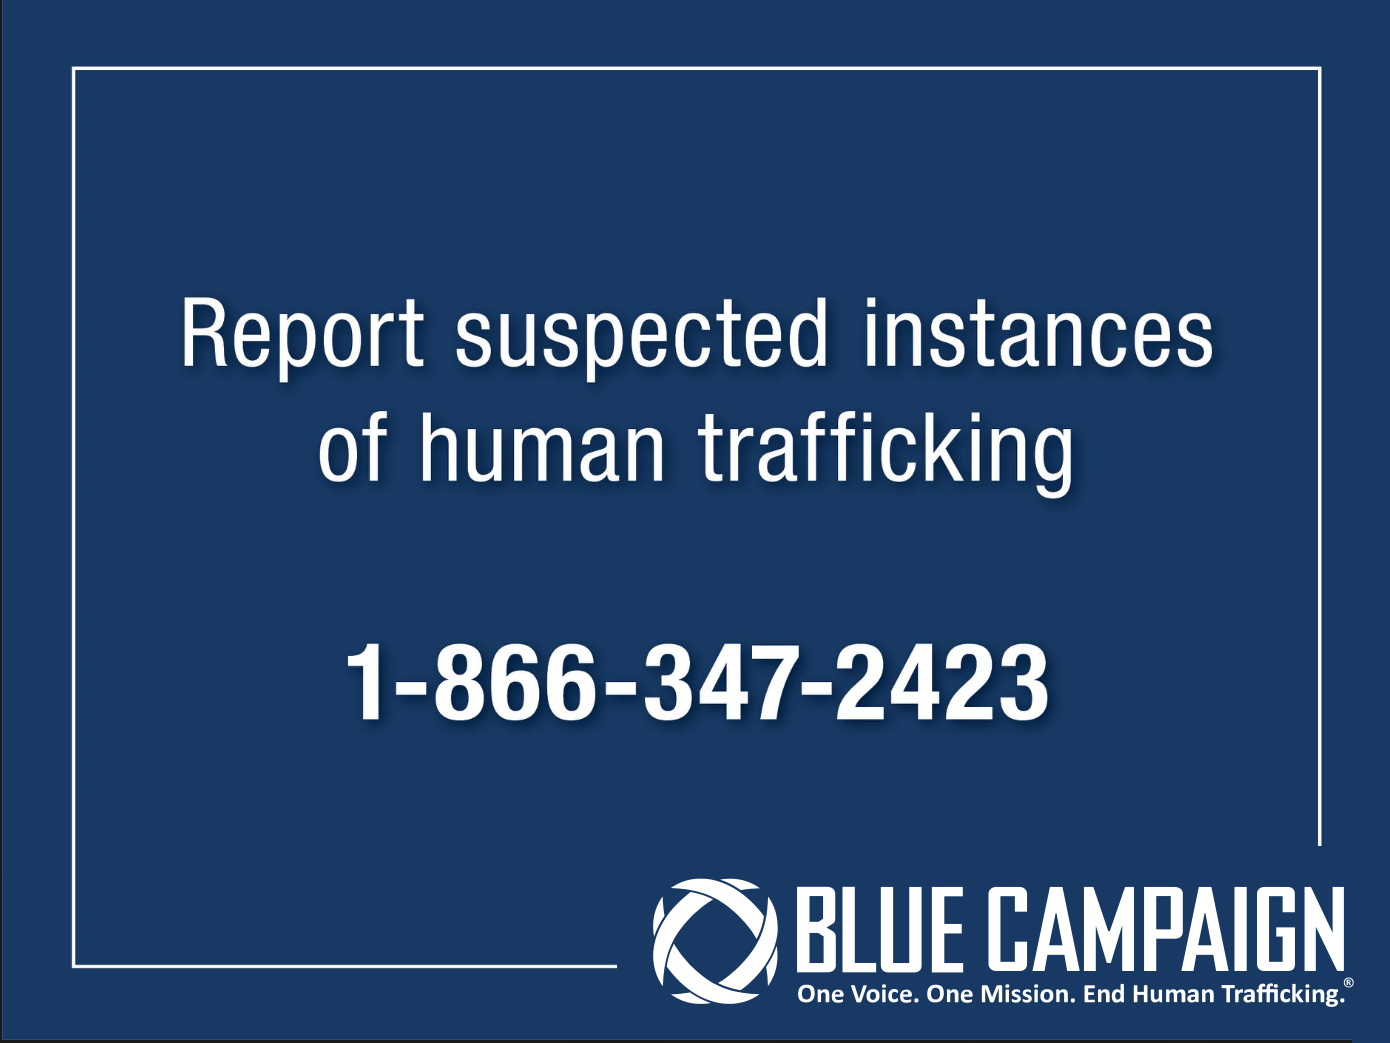 "Report suspected instances of human trafficking at 1-866-347-2423. Blue Campaign. One Voice. One Mission. End Human Trafficking.